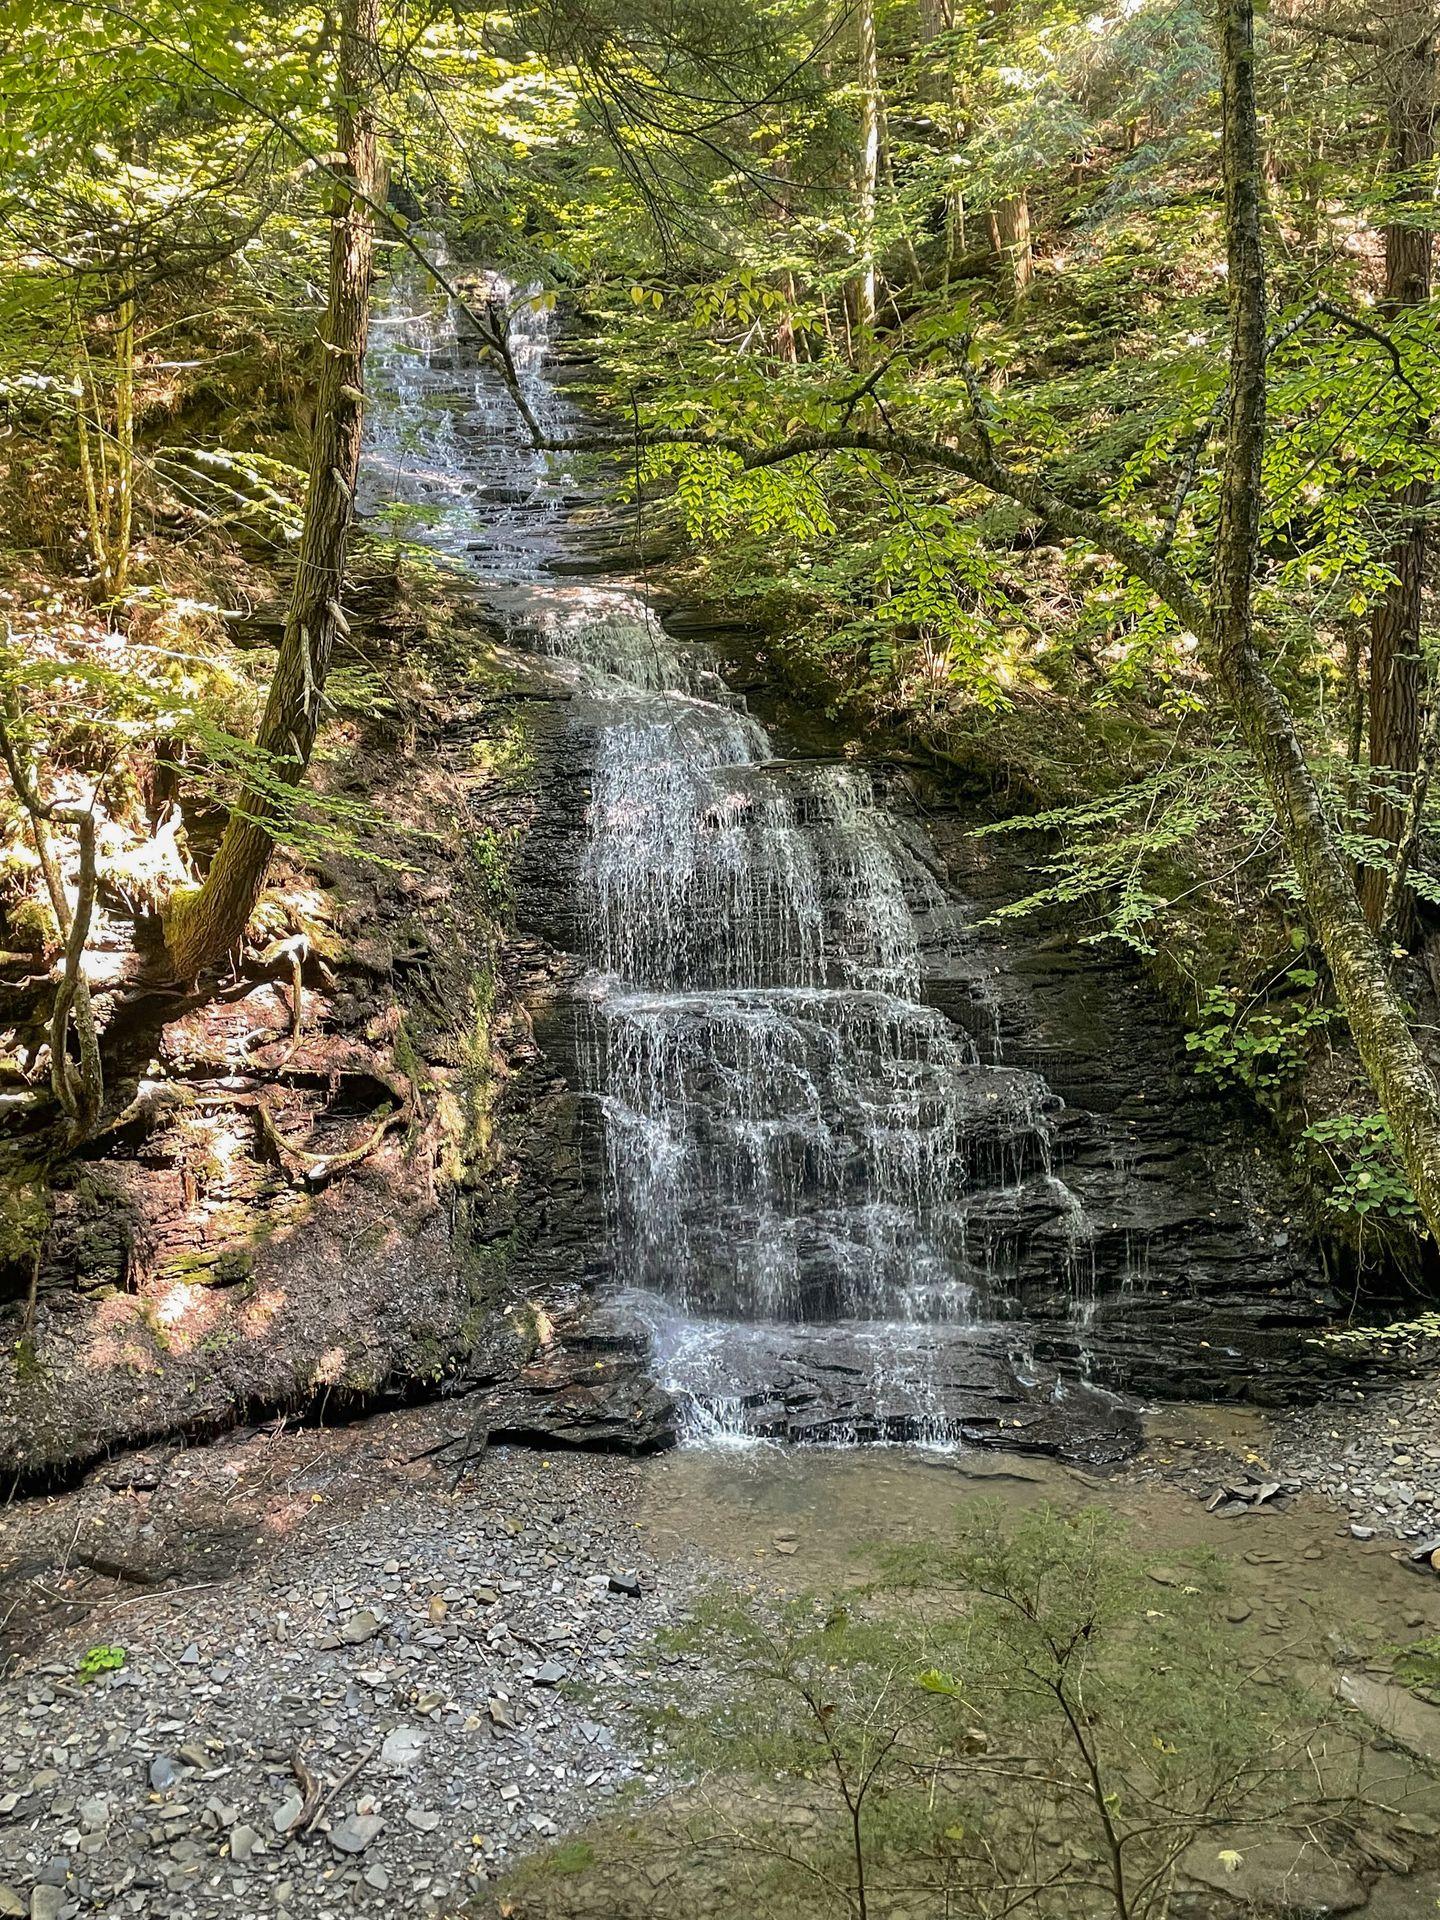 A waterfall surrounded by green trees at Fillmore Glen.